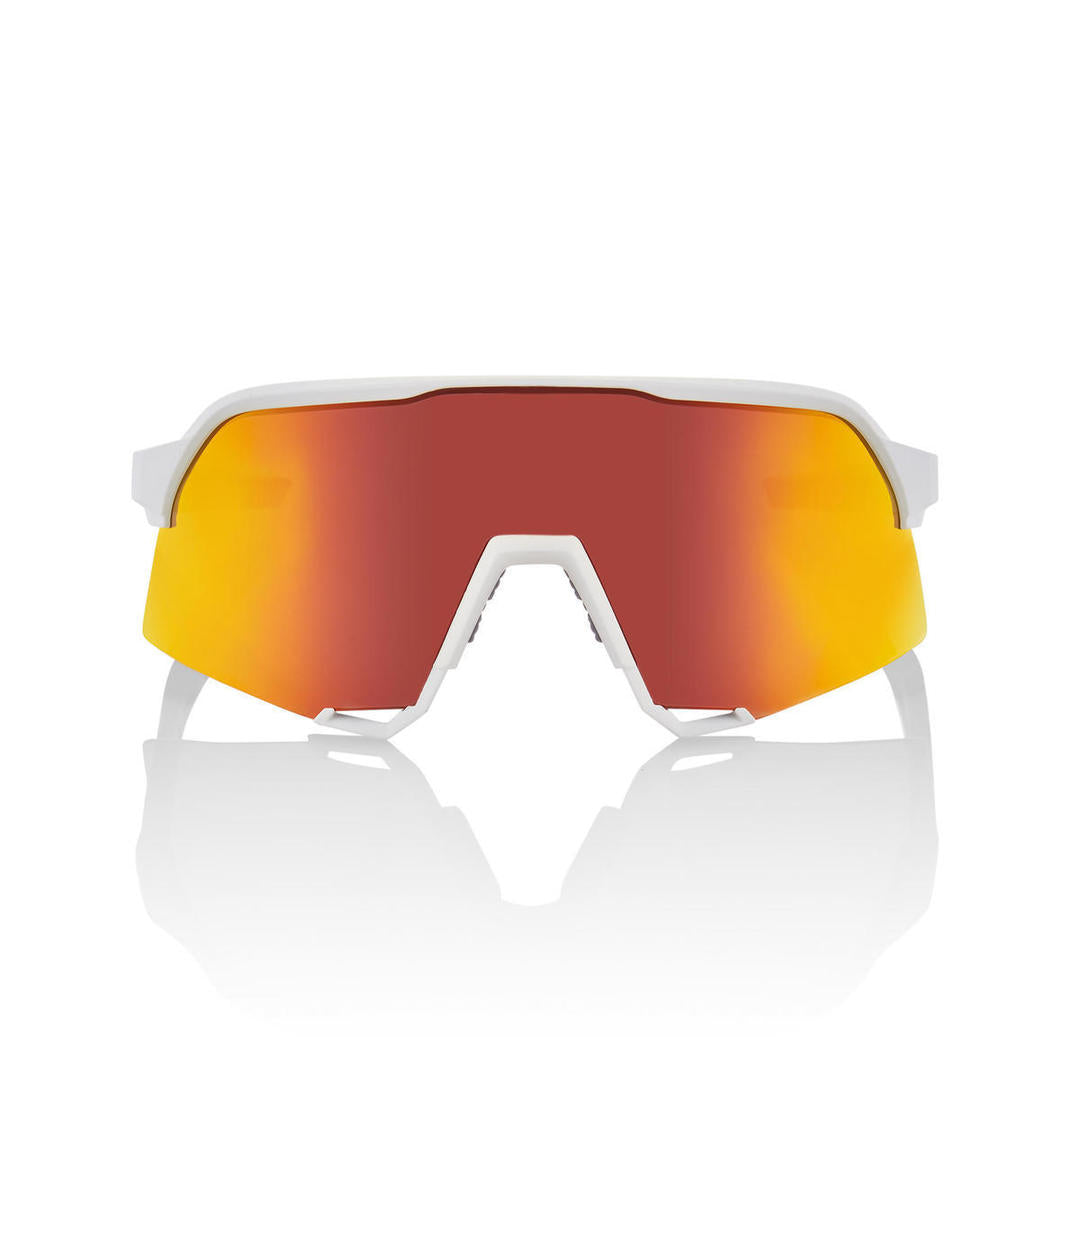 RIDE 100% Gafas de Sol S3 - Soft Tact White Hiper Red Multilayer Mirror Lens